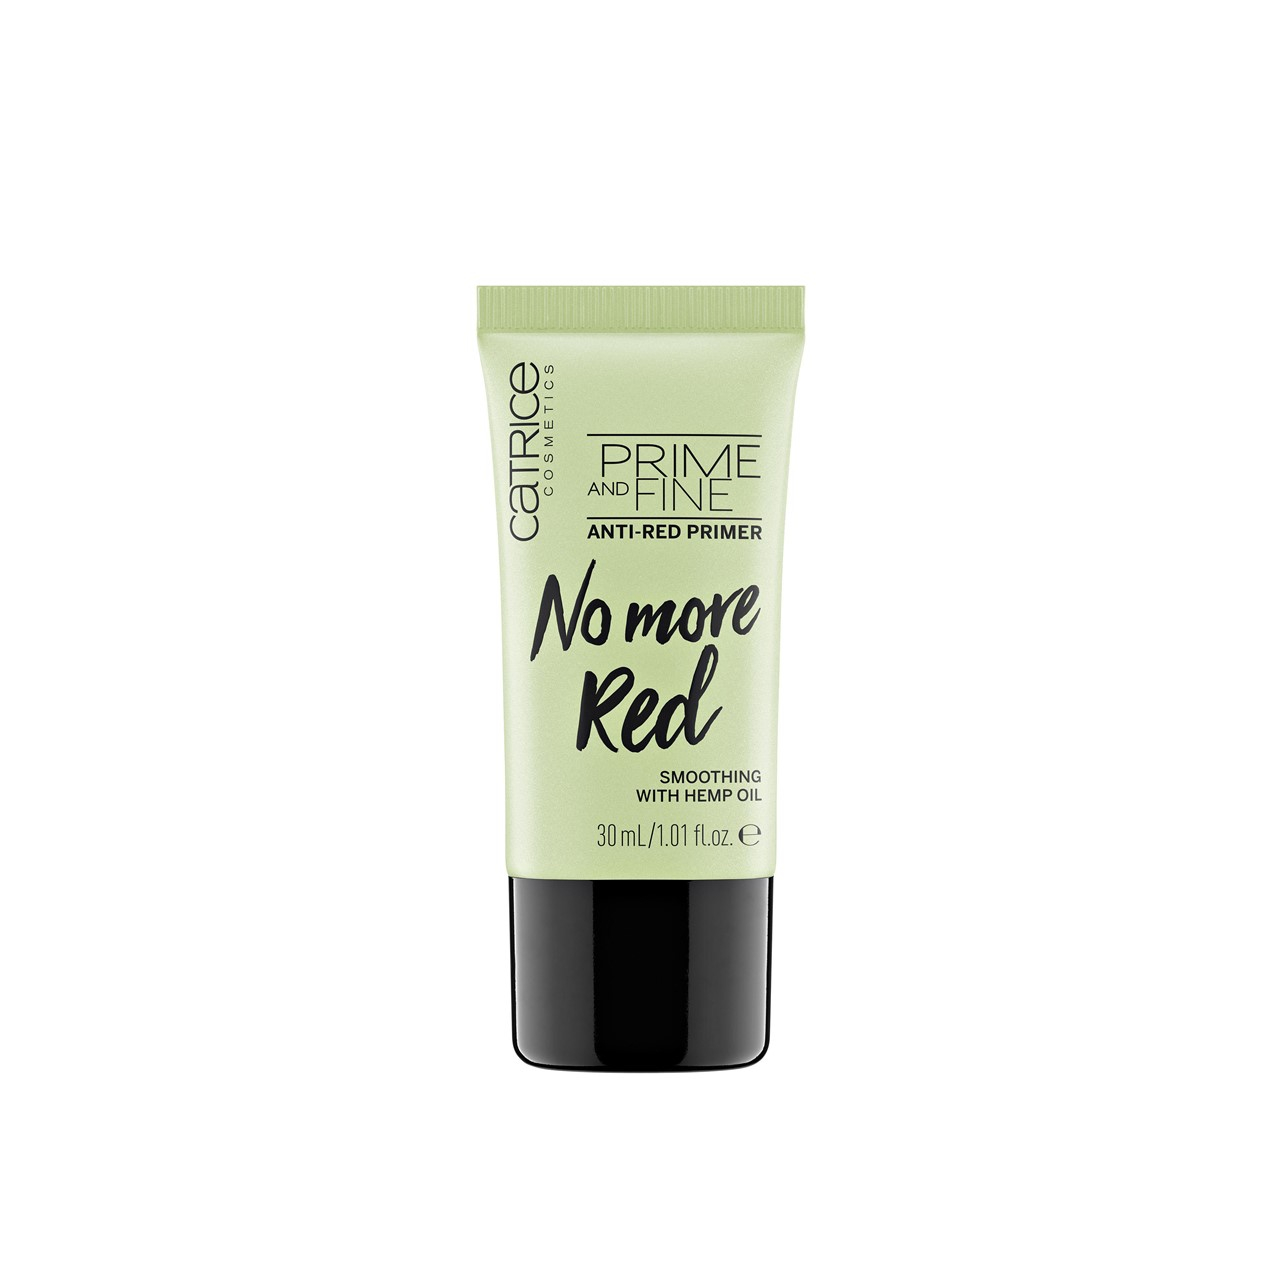 Buy Catrice And Prime Anti-Red 30ml No More Greenland Red Primer · Fine